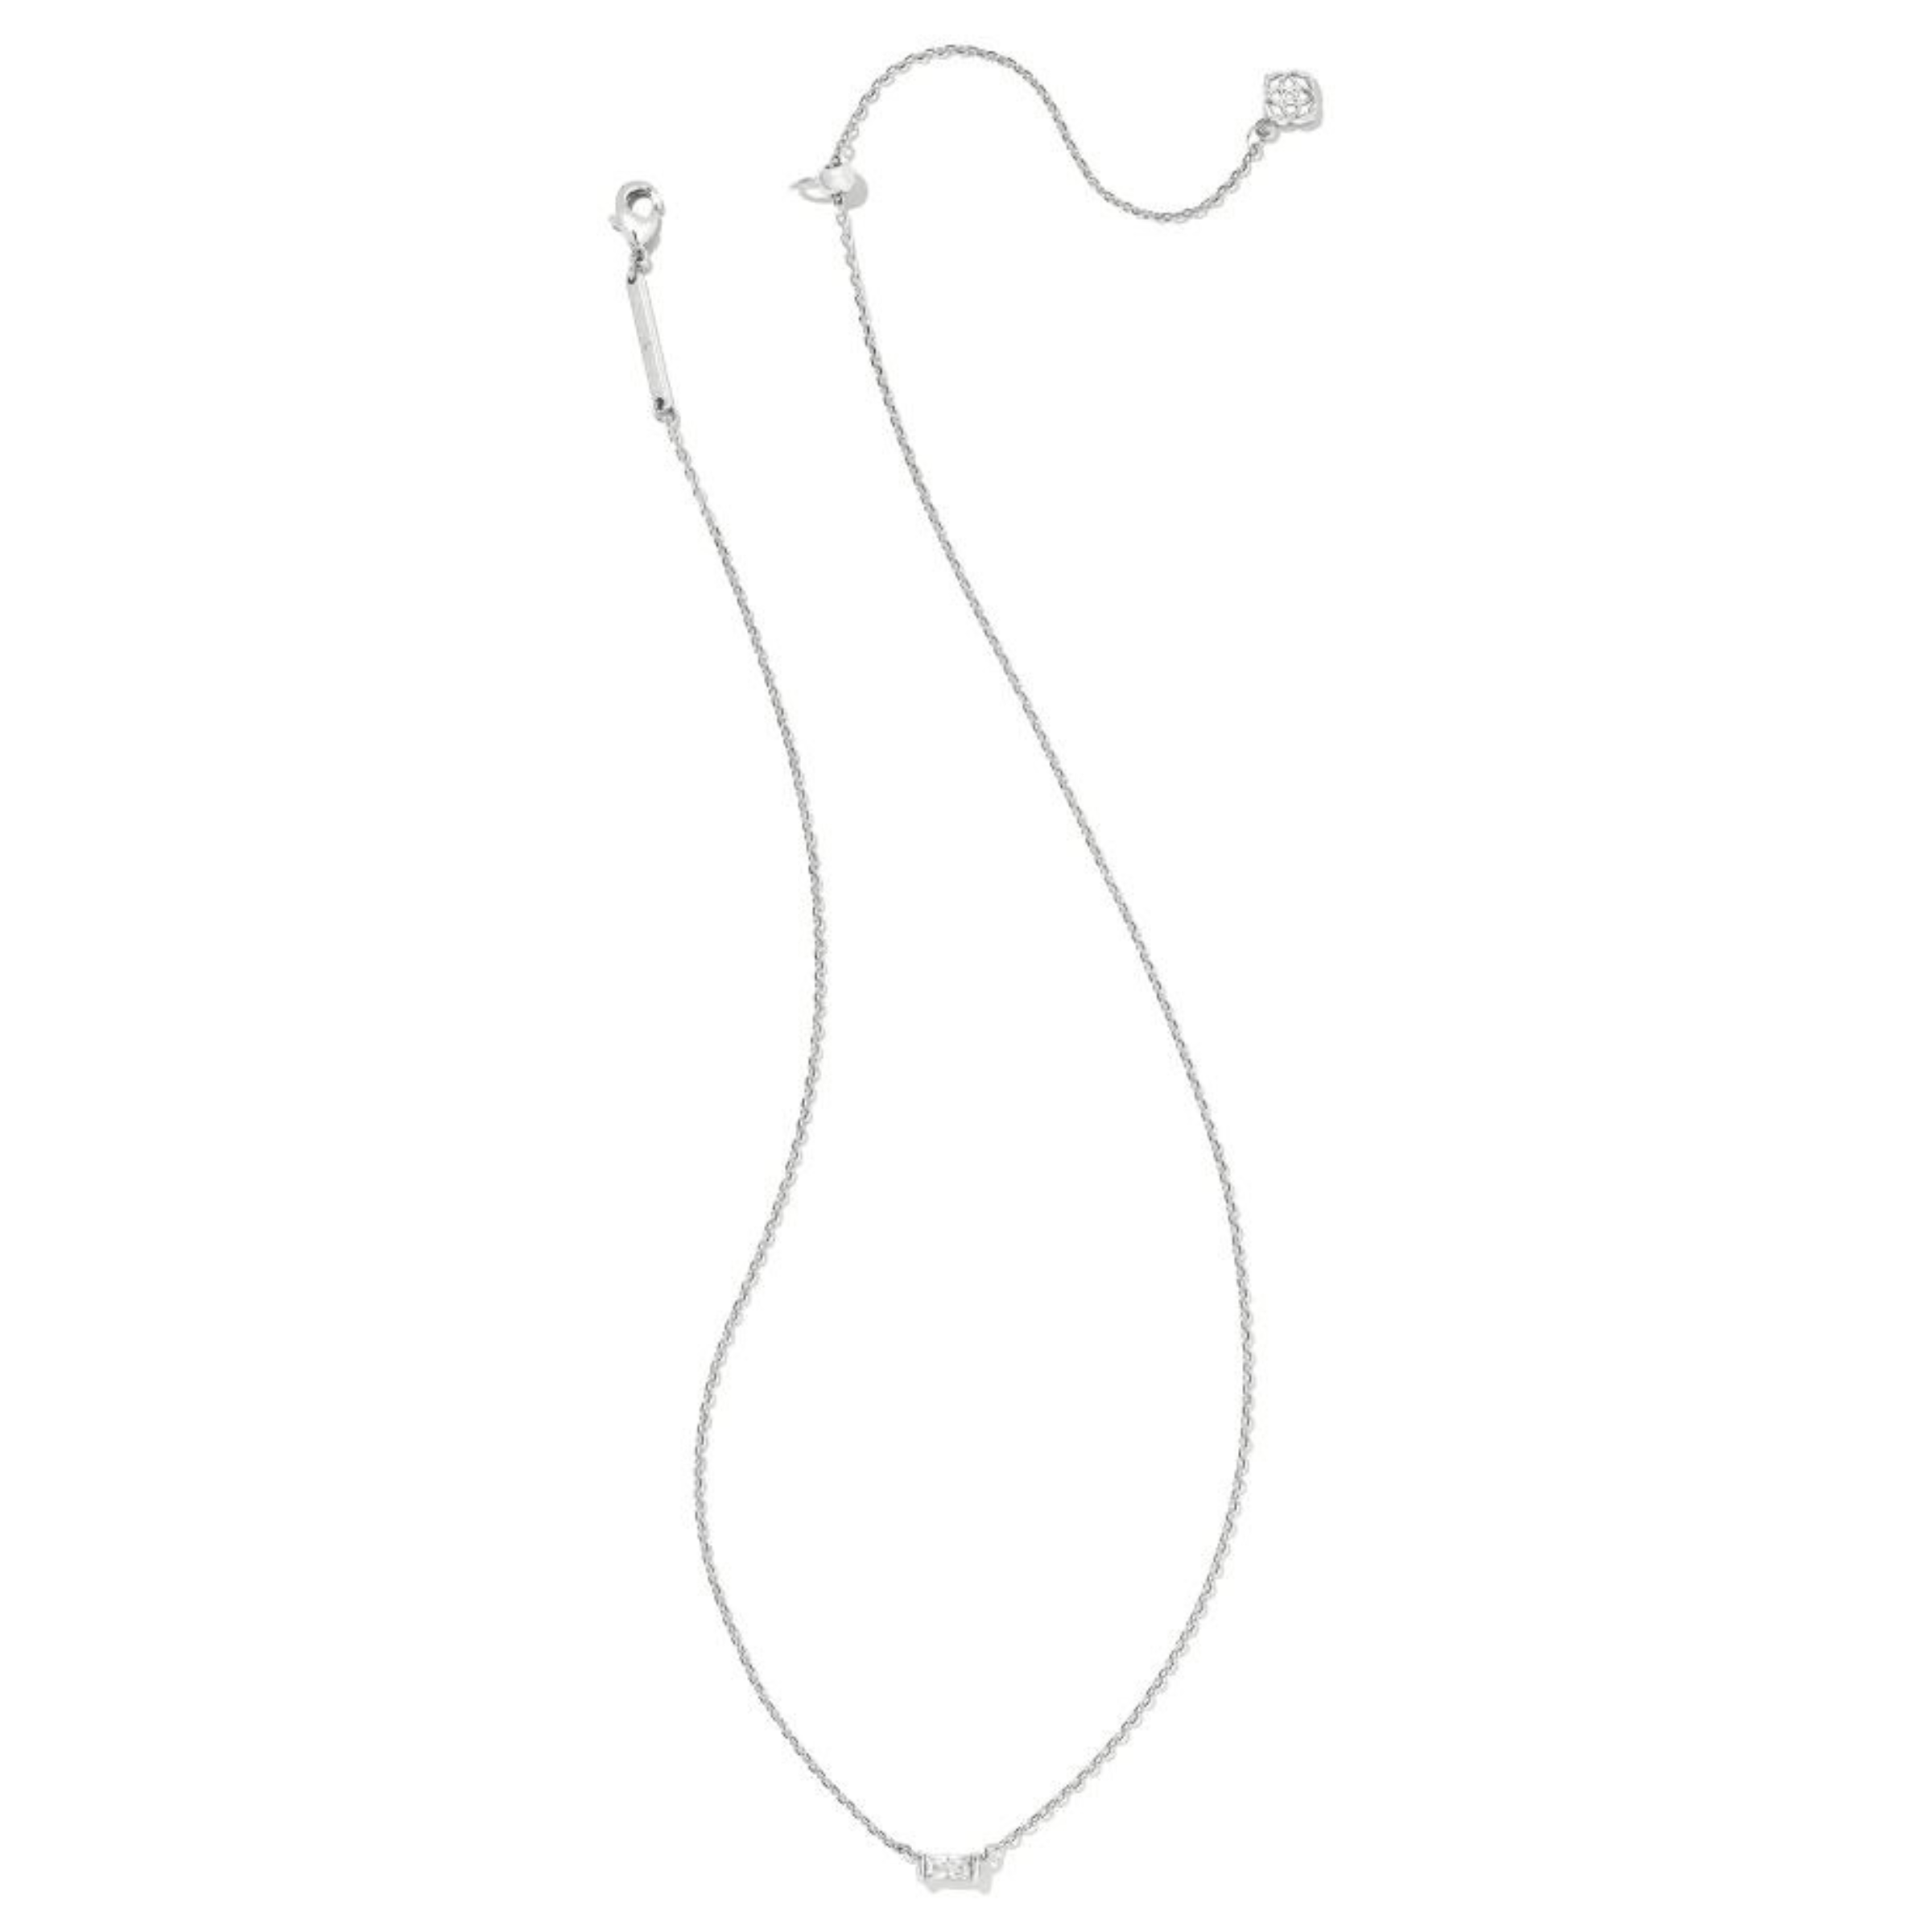 Kendra Scott | Juliette Silver Pendant Necklace in White Crystal - Giddy Up Glamour Boutique